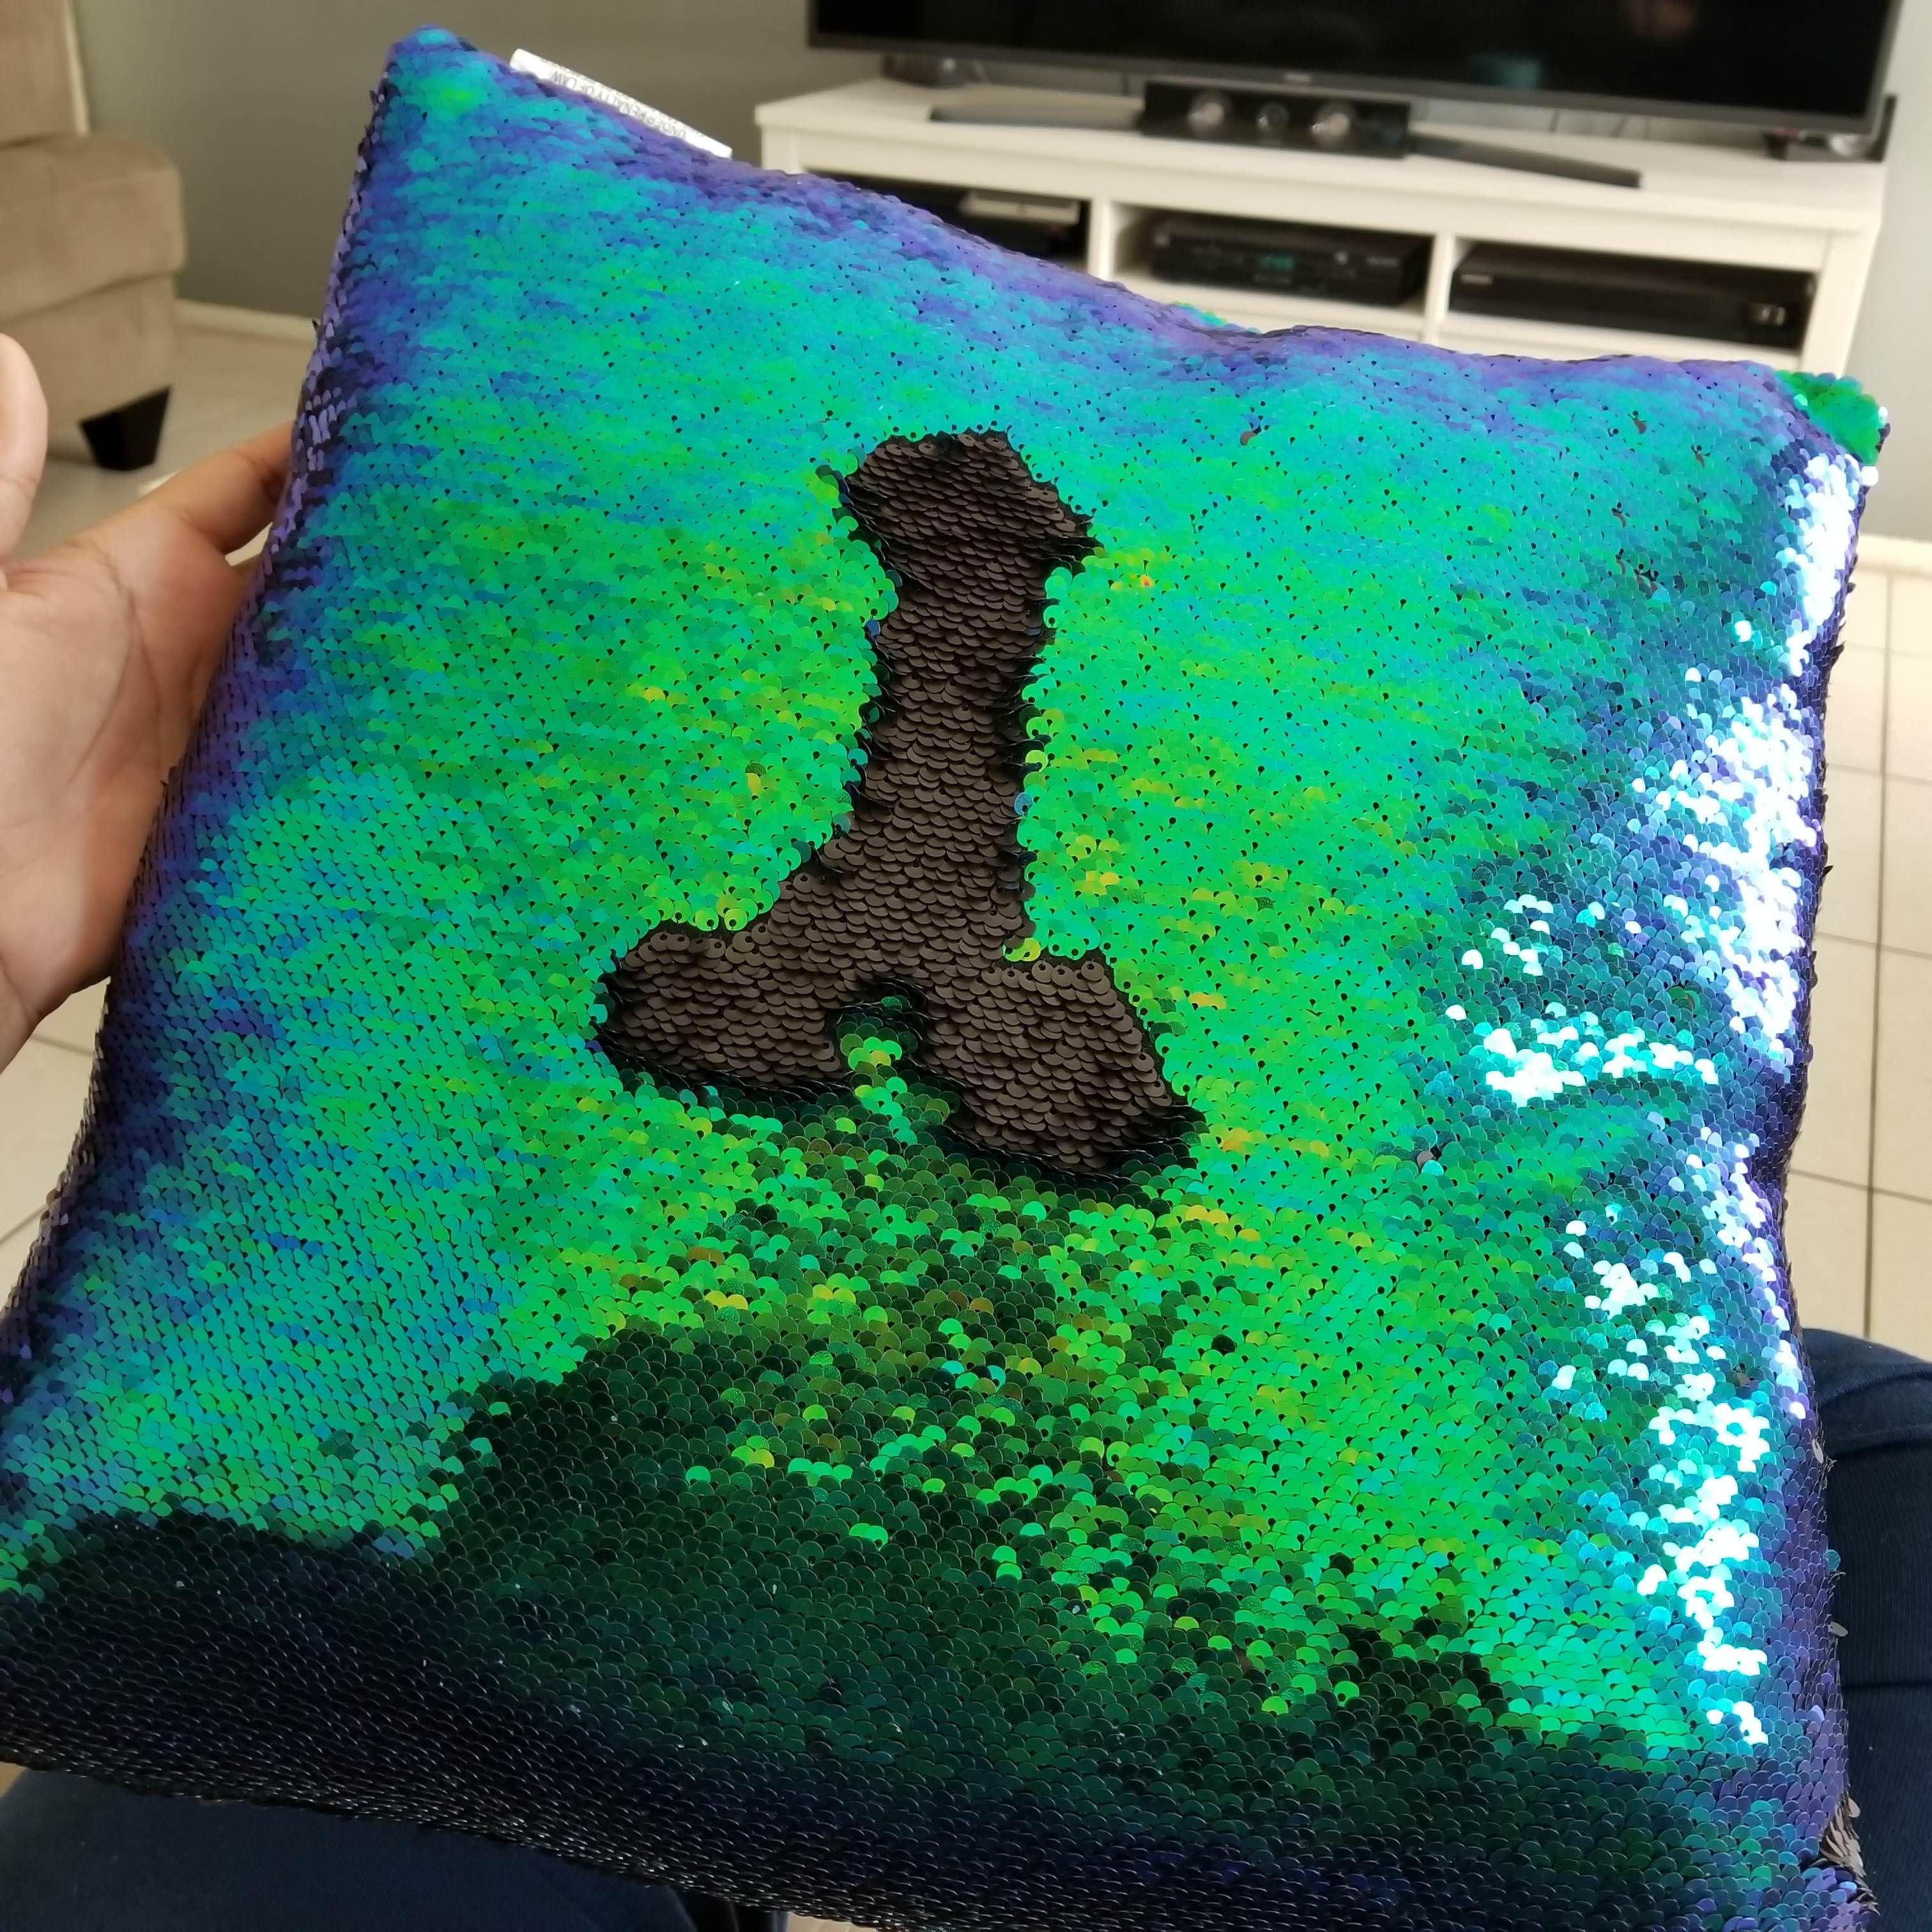 Our daughter used a reversible sequin pillow to draw the "Eiffel Tower". Lol!